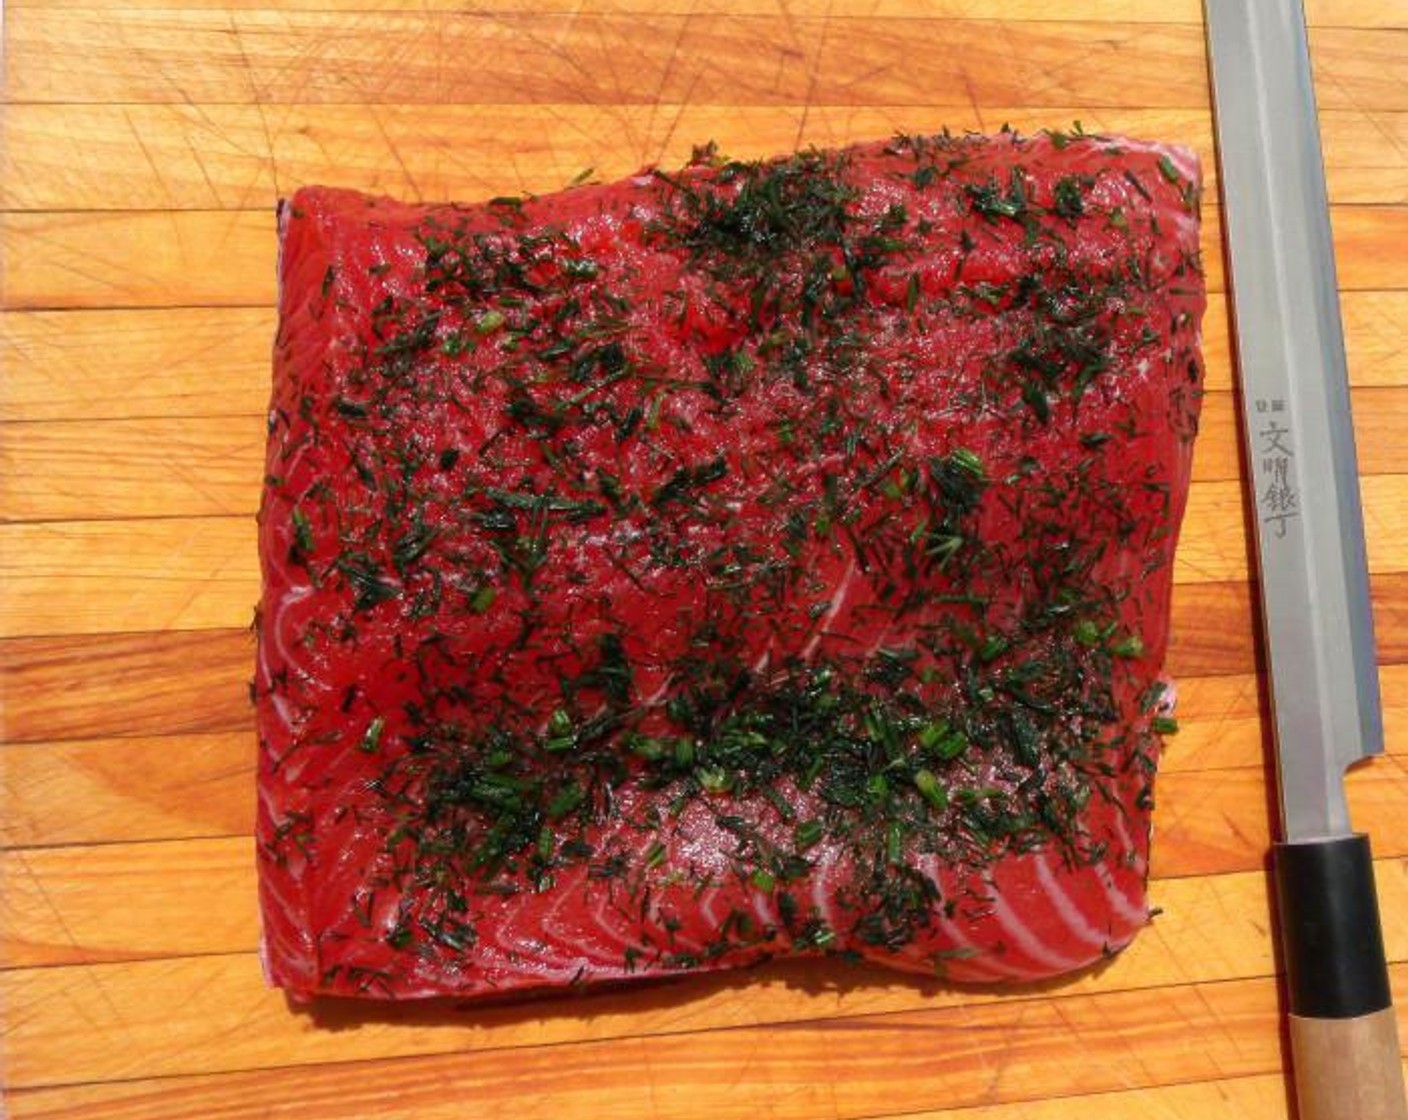 step 6 After 3 or 4 days, rinse the salmon under running water, pad dry, then cover flesh side with Fresh Dill (1/4 cup).